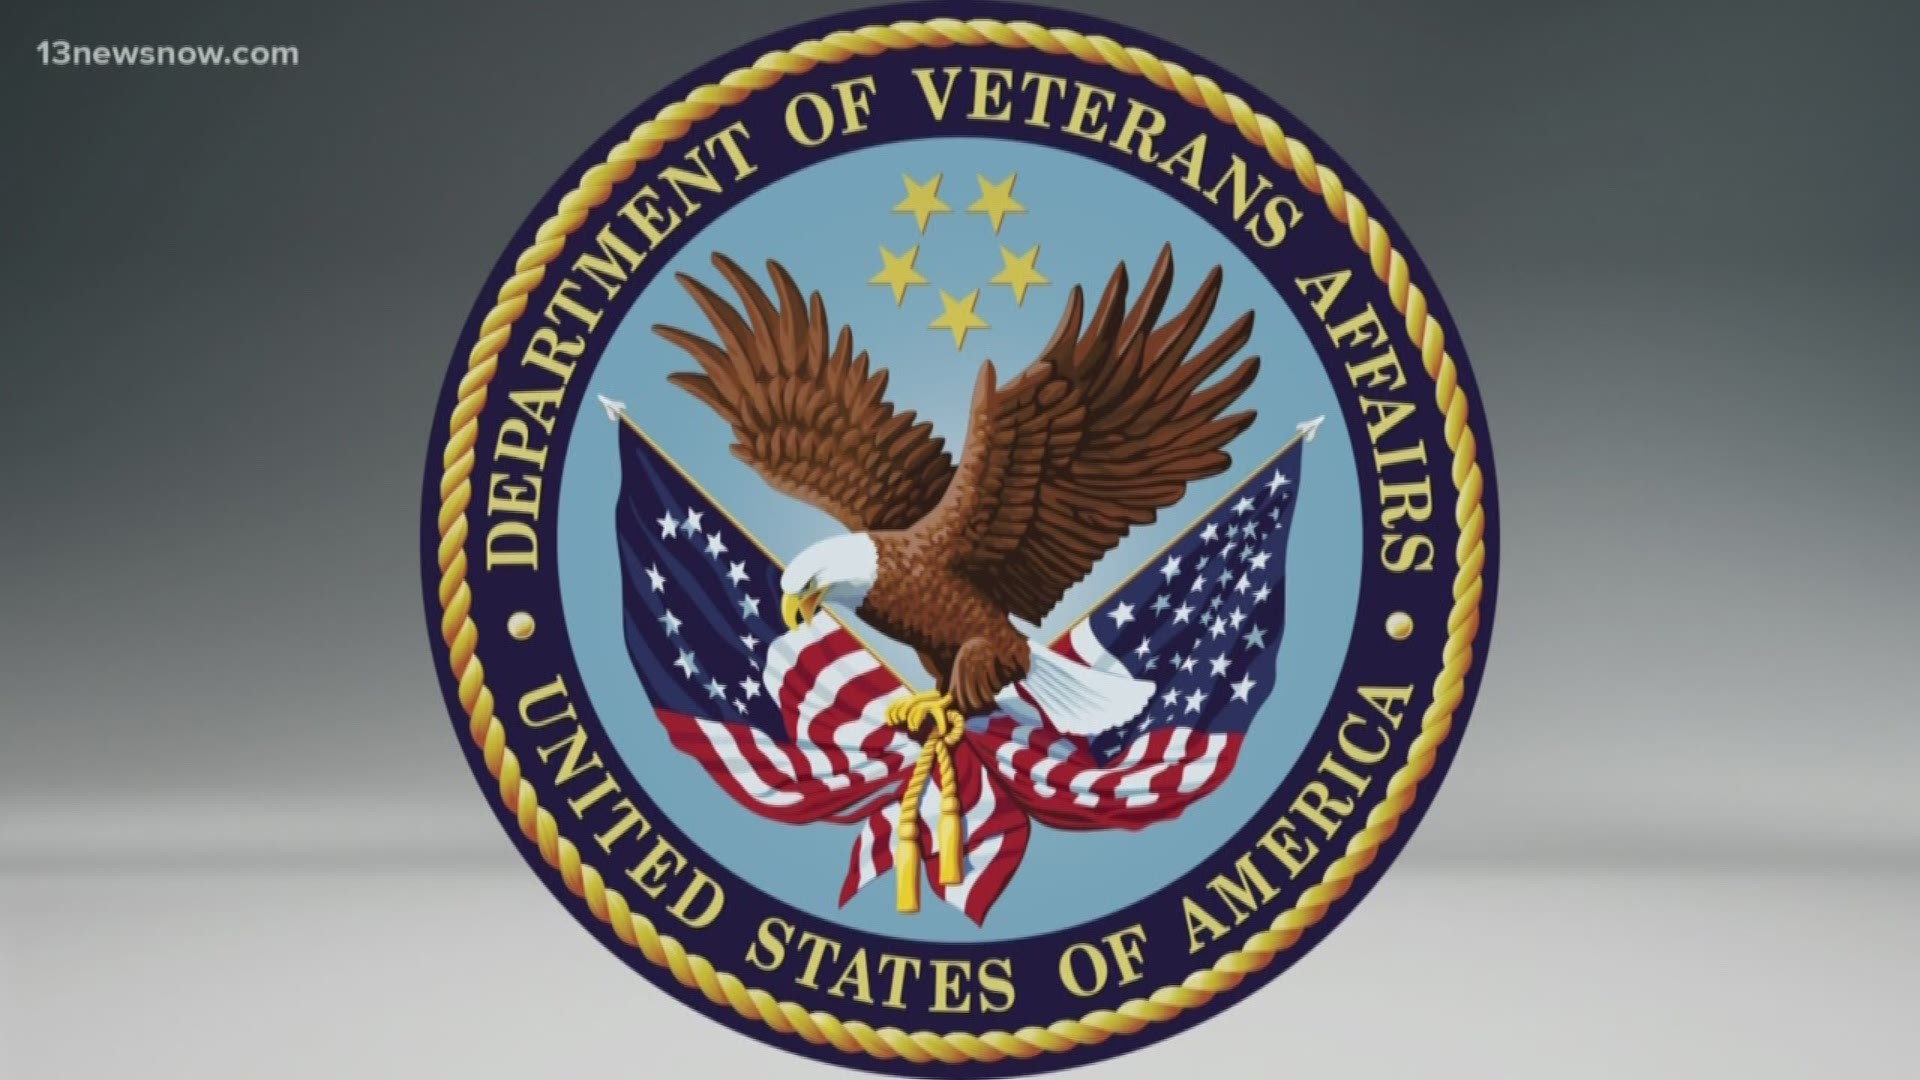 A bill just passed by the house allows Veterans Affairs to perform a study. The study will look at making VA websites accessible for blind and deaf veterans.